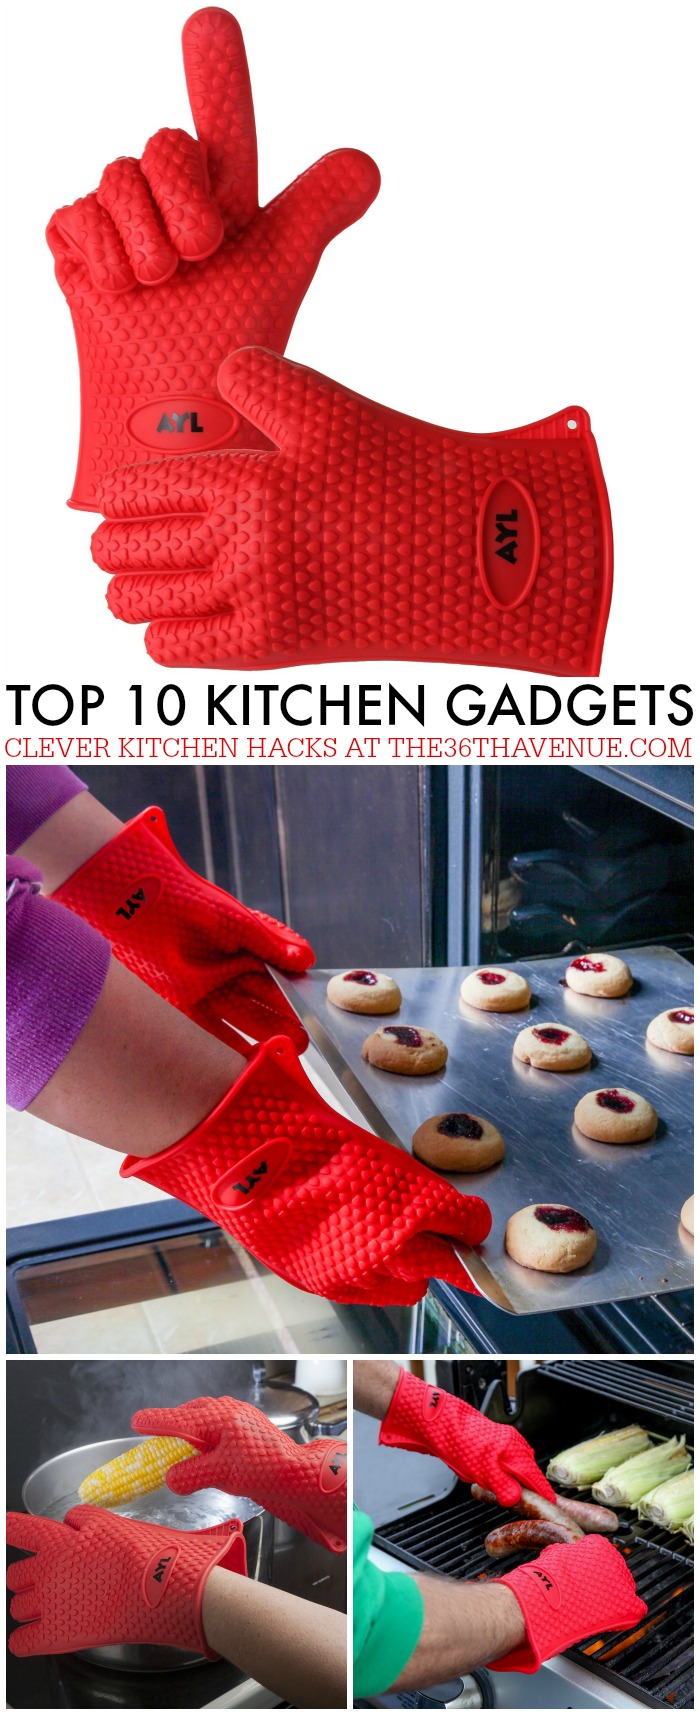 Top 10 Kitchen Gadgets That Make Your Life Easier